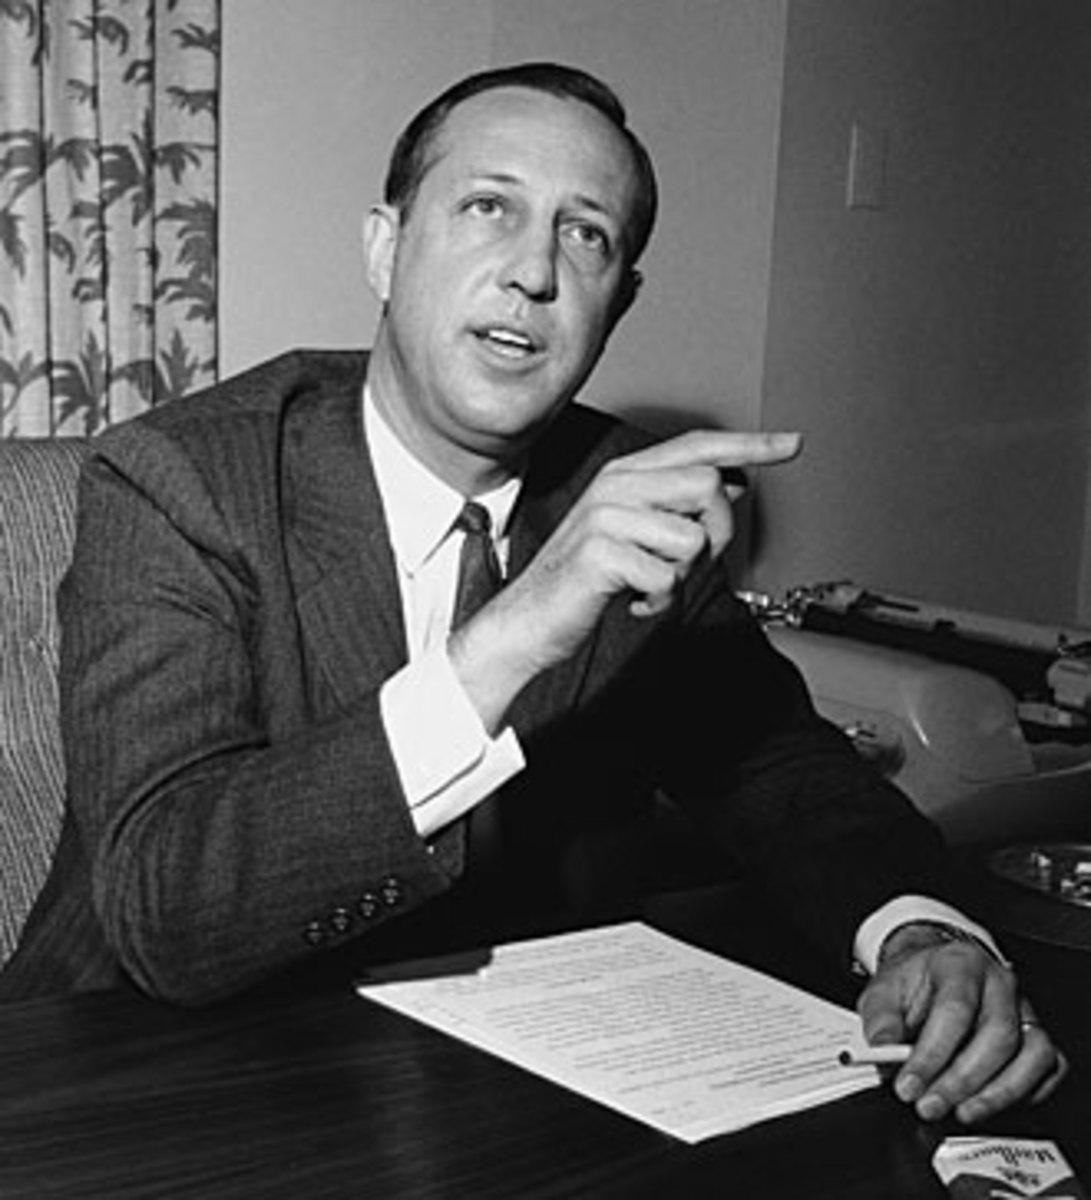 Pete Rozelle's otherwise strong tenure as NFL commissioner would always be marred by his decision to play games that weekend.